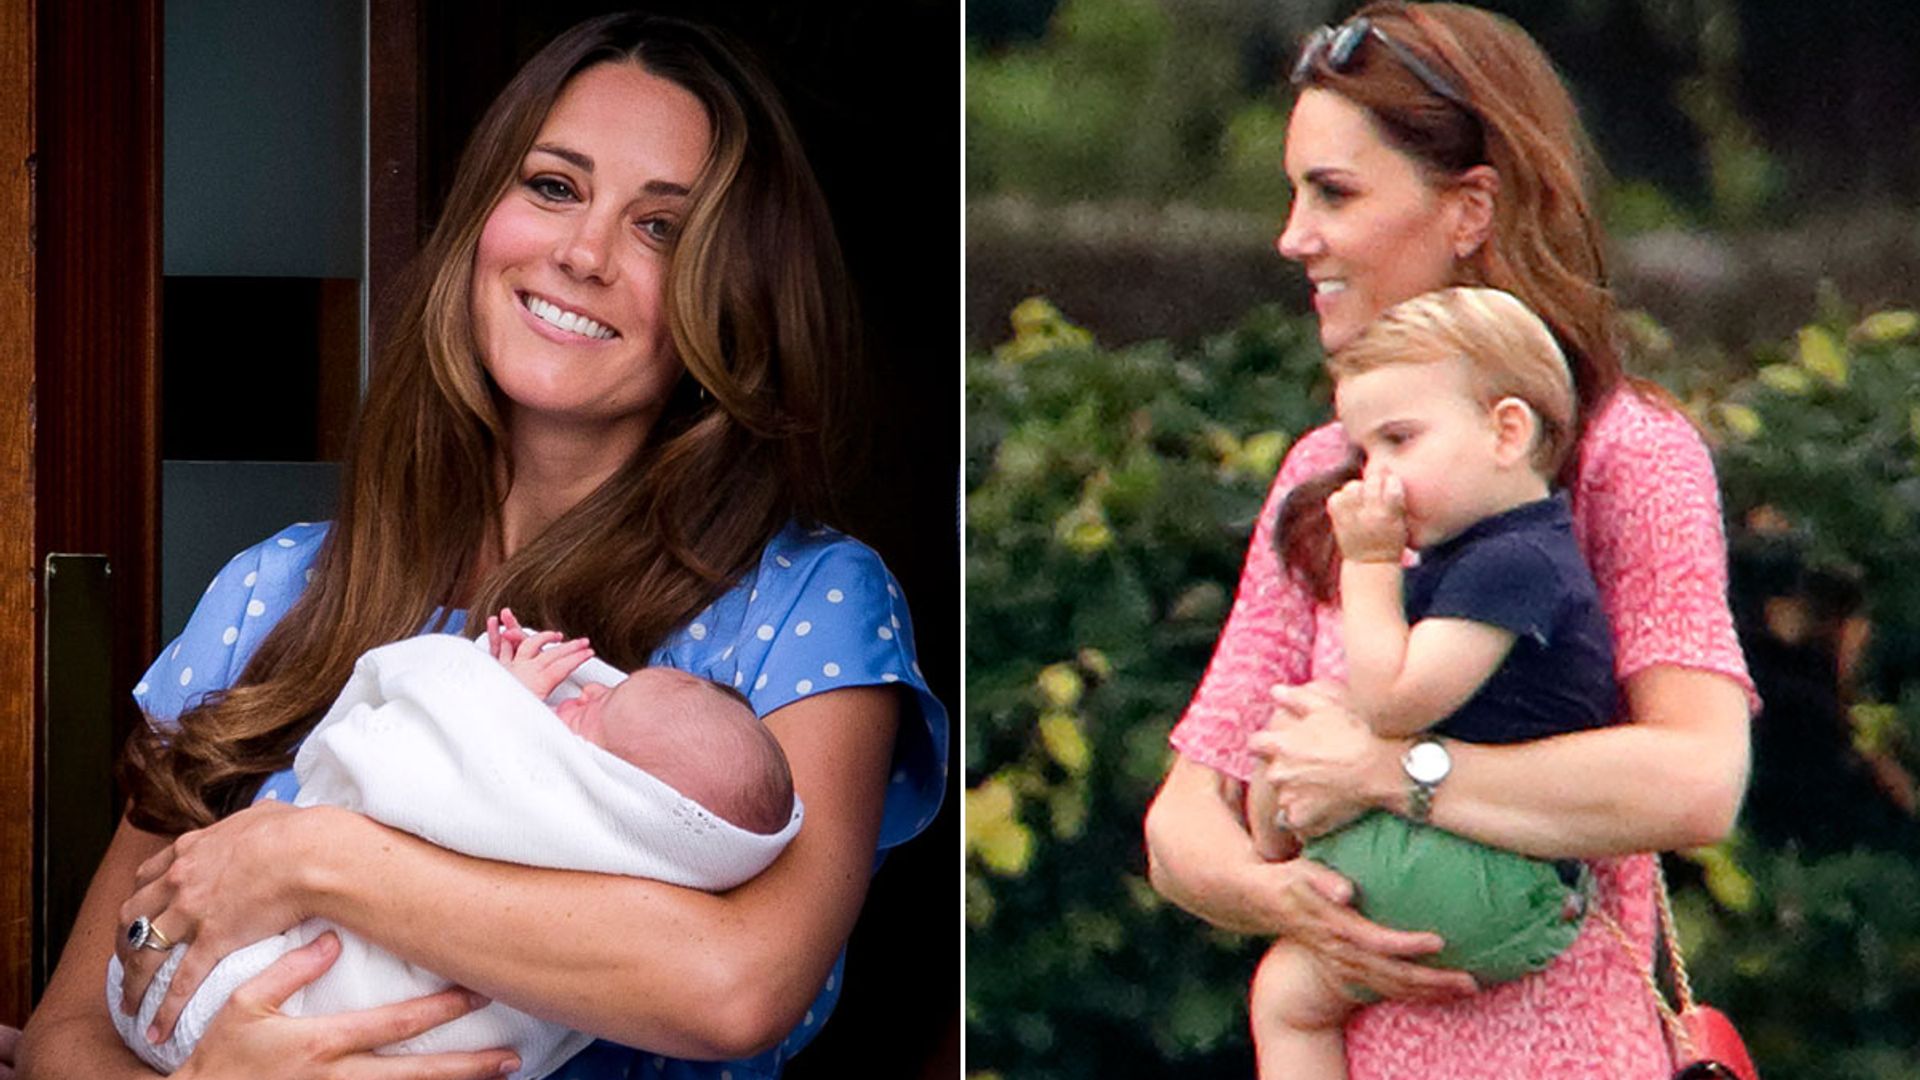 How Kate Middleton has changed since becoming a mother